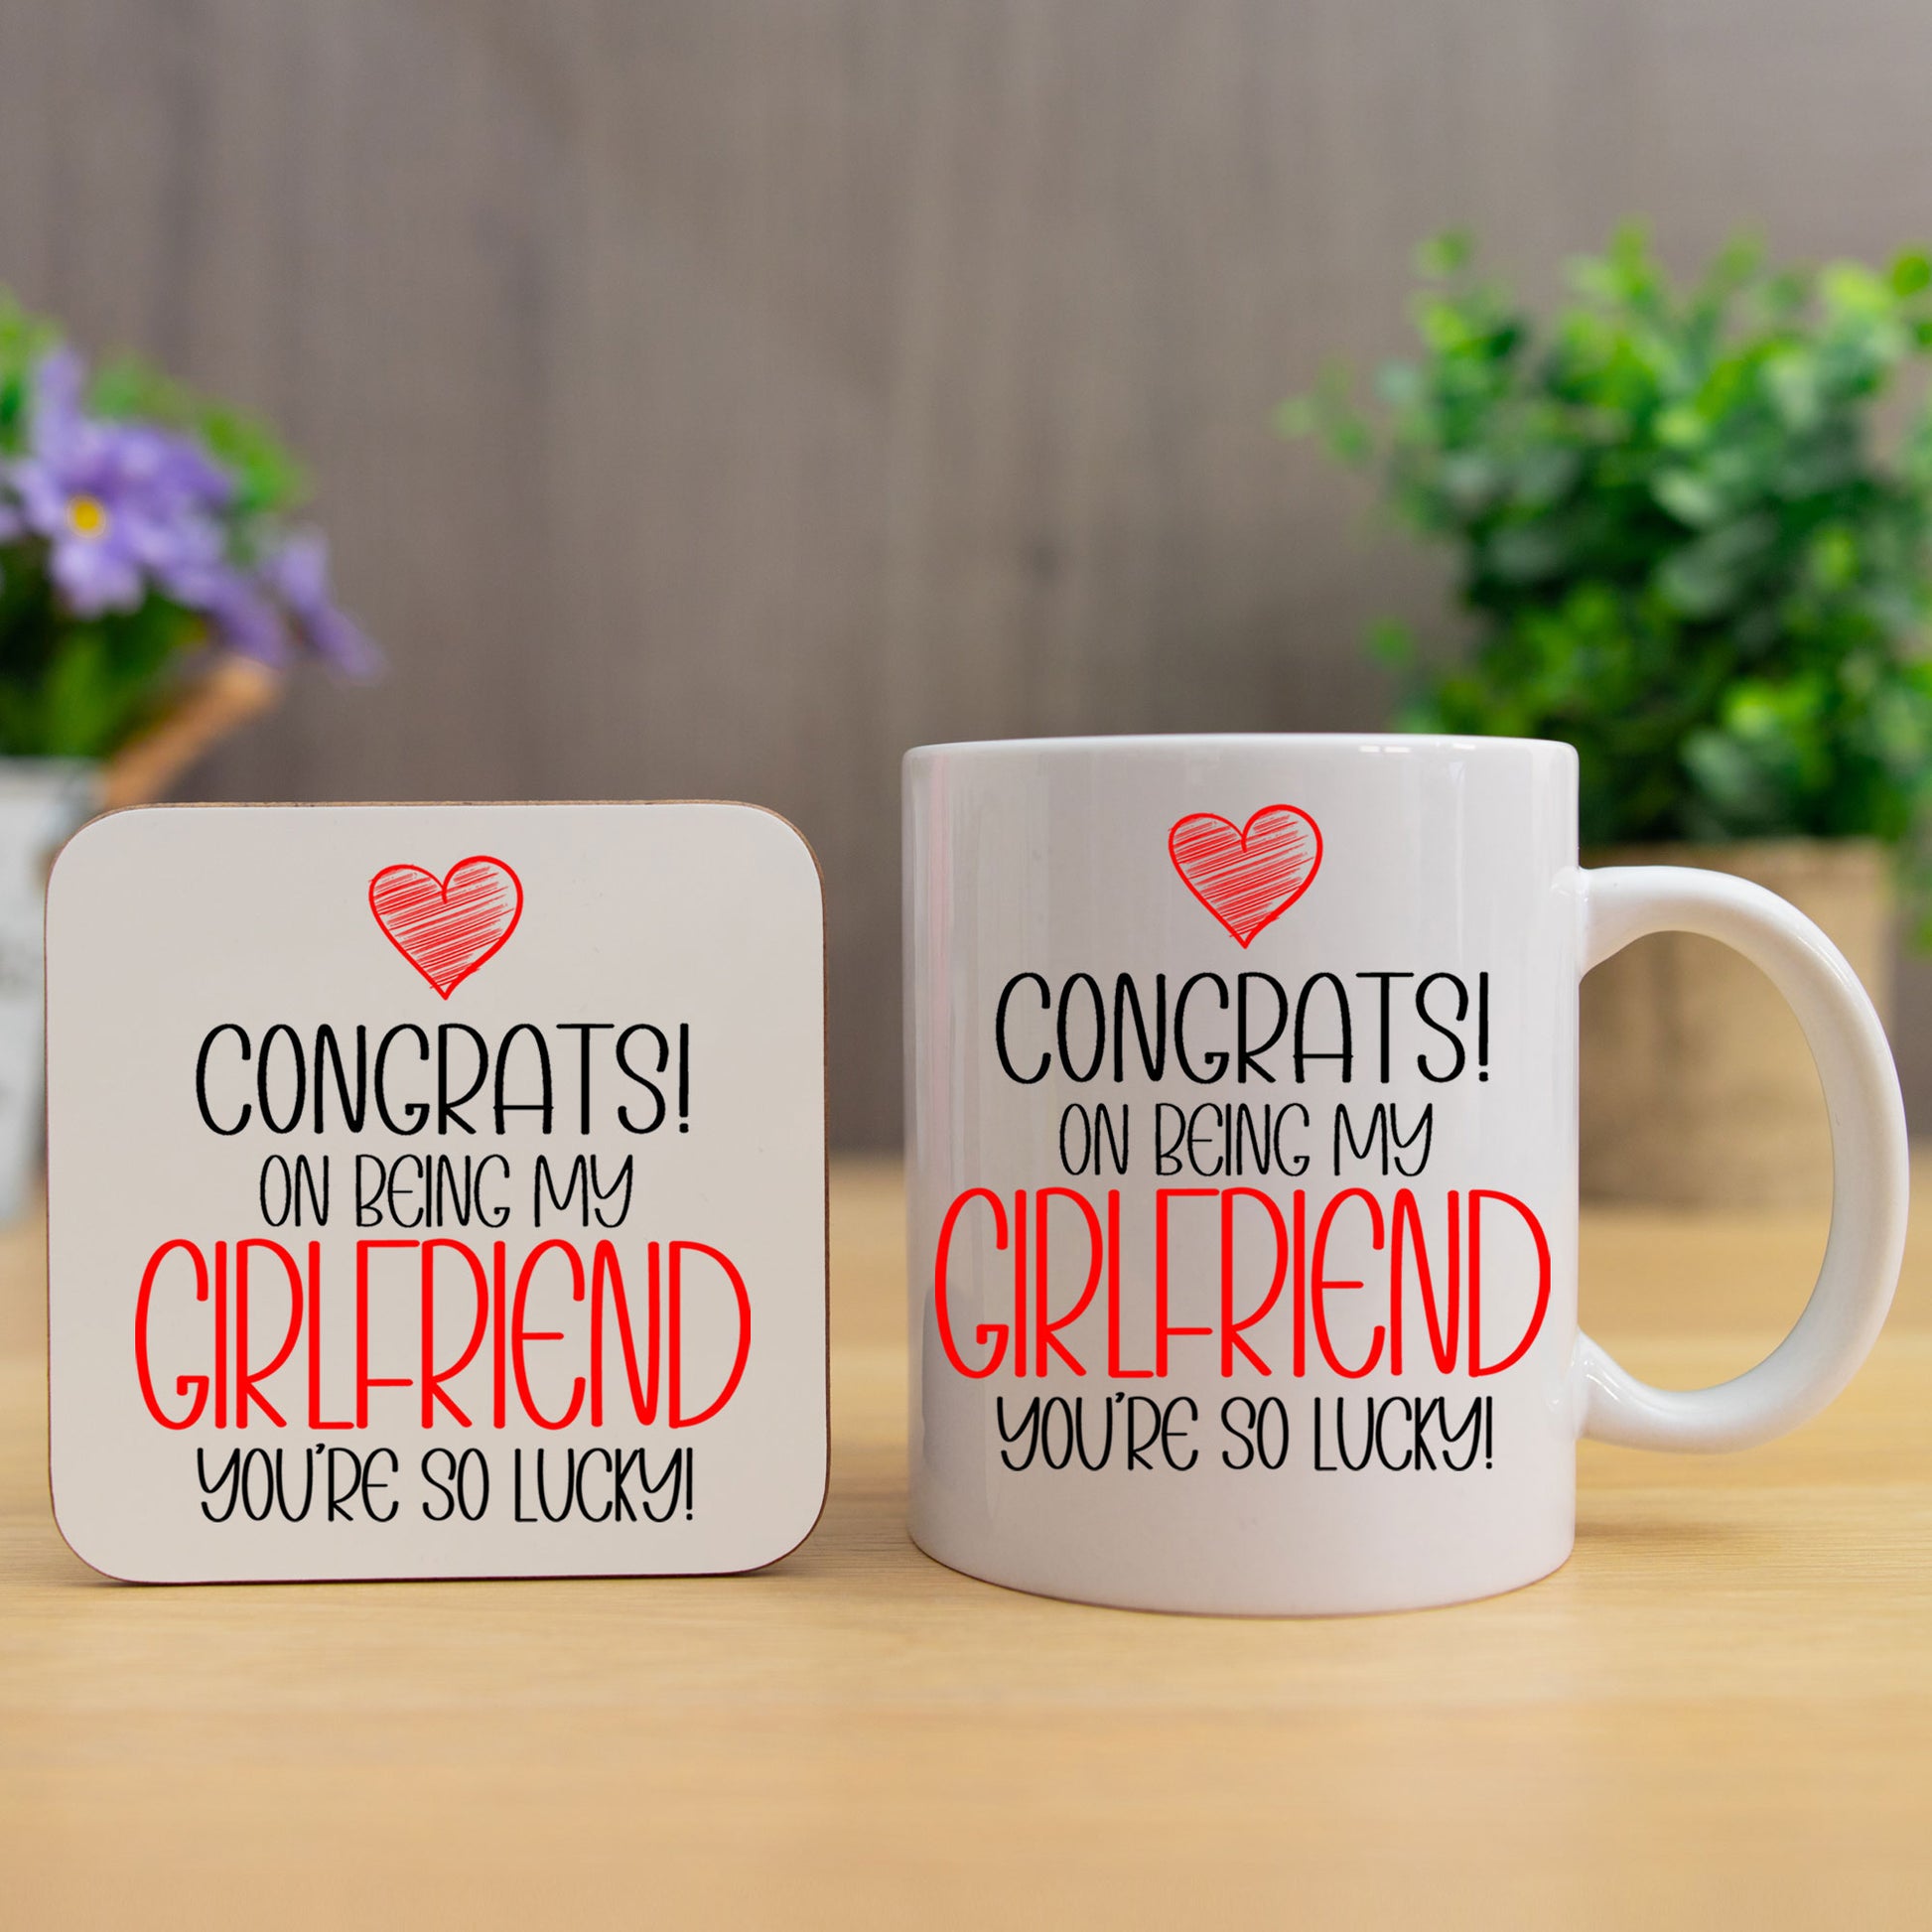 Congrats On Being My Girlfriend Mug and/or Coaster Gift  - Always Looking Good - So Lucky Mug & Coaster Set  